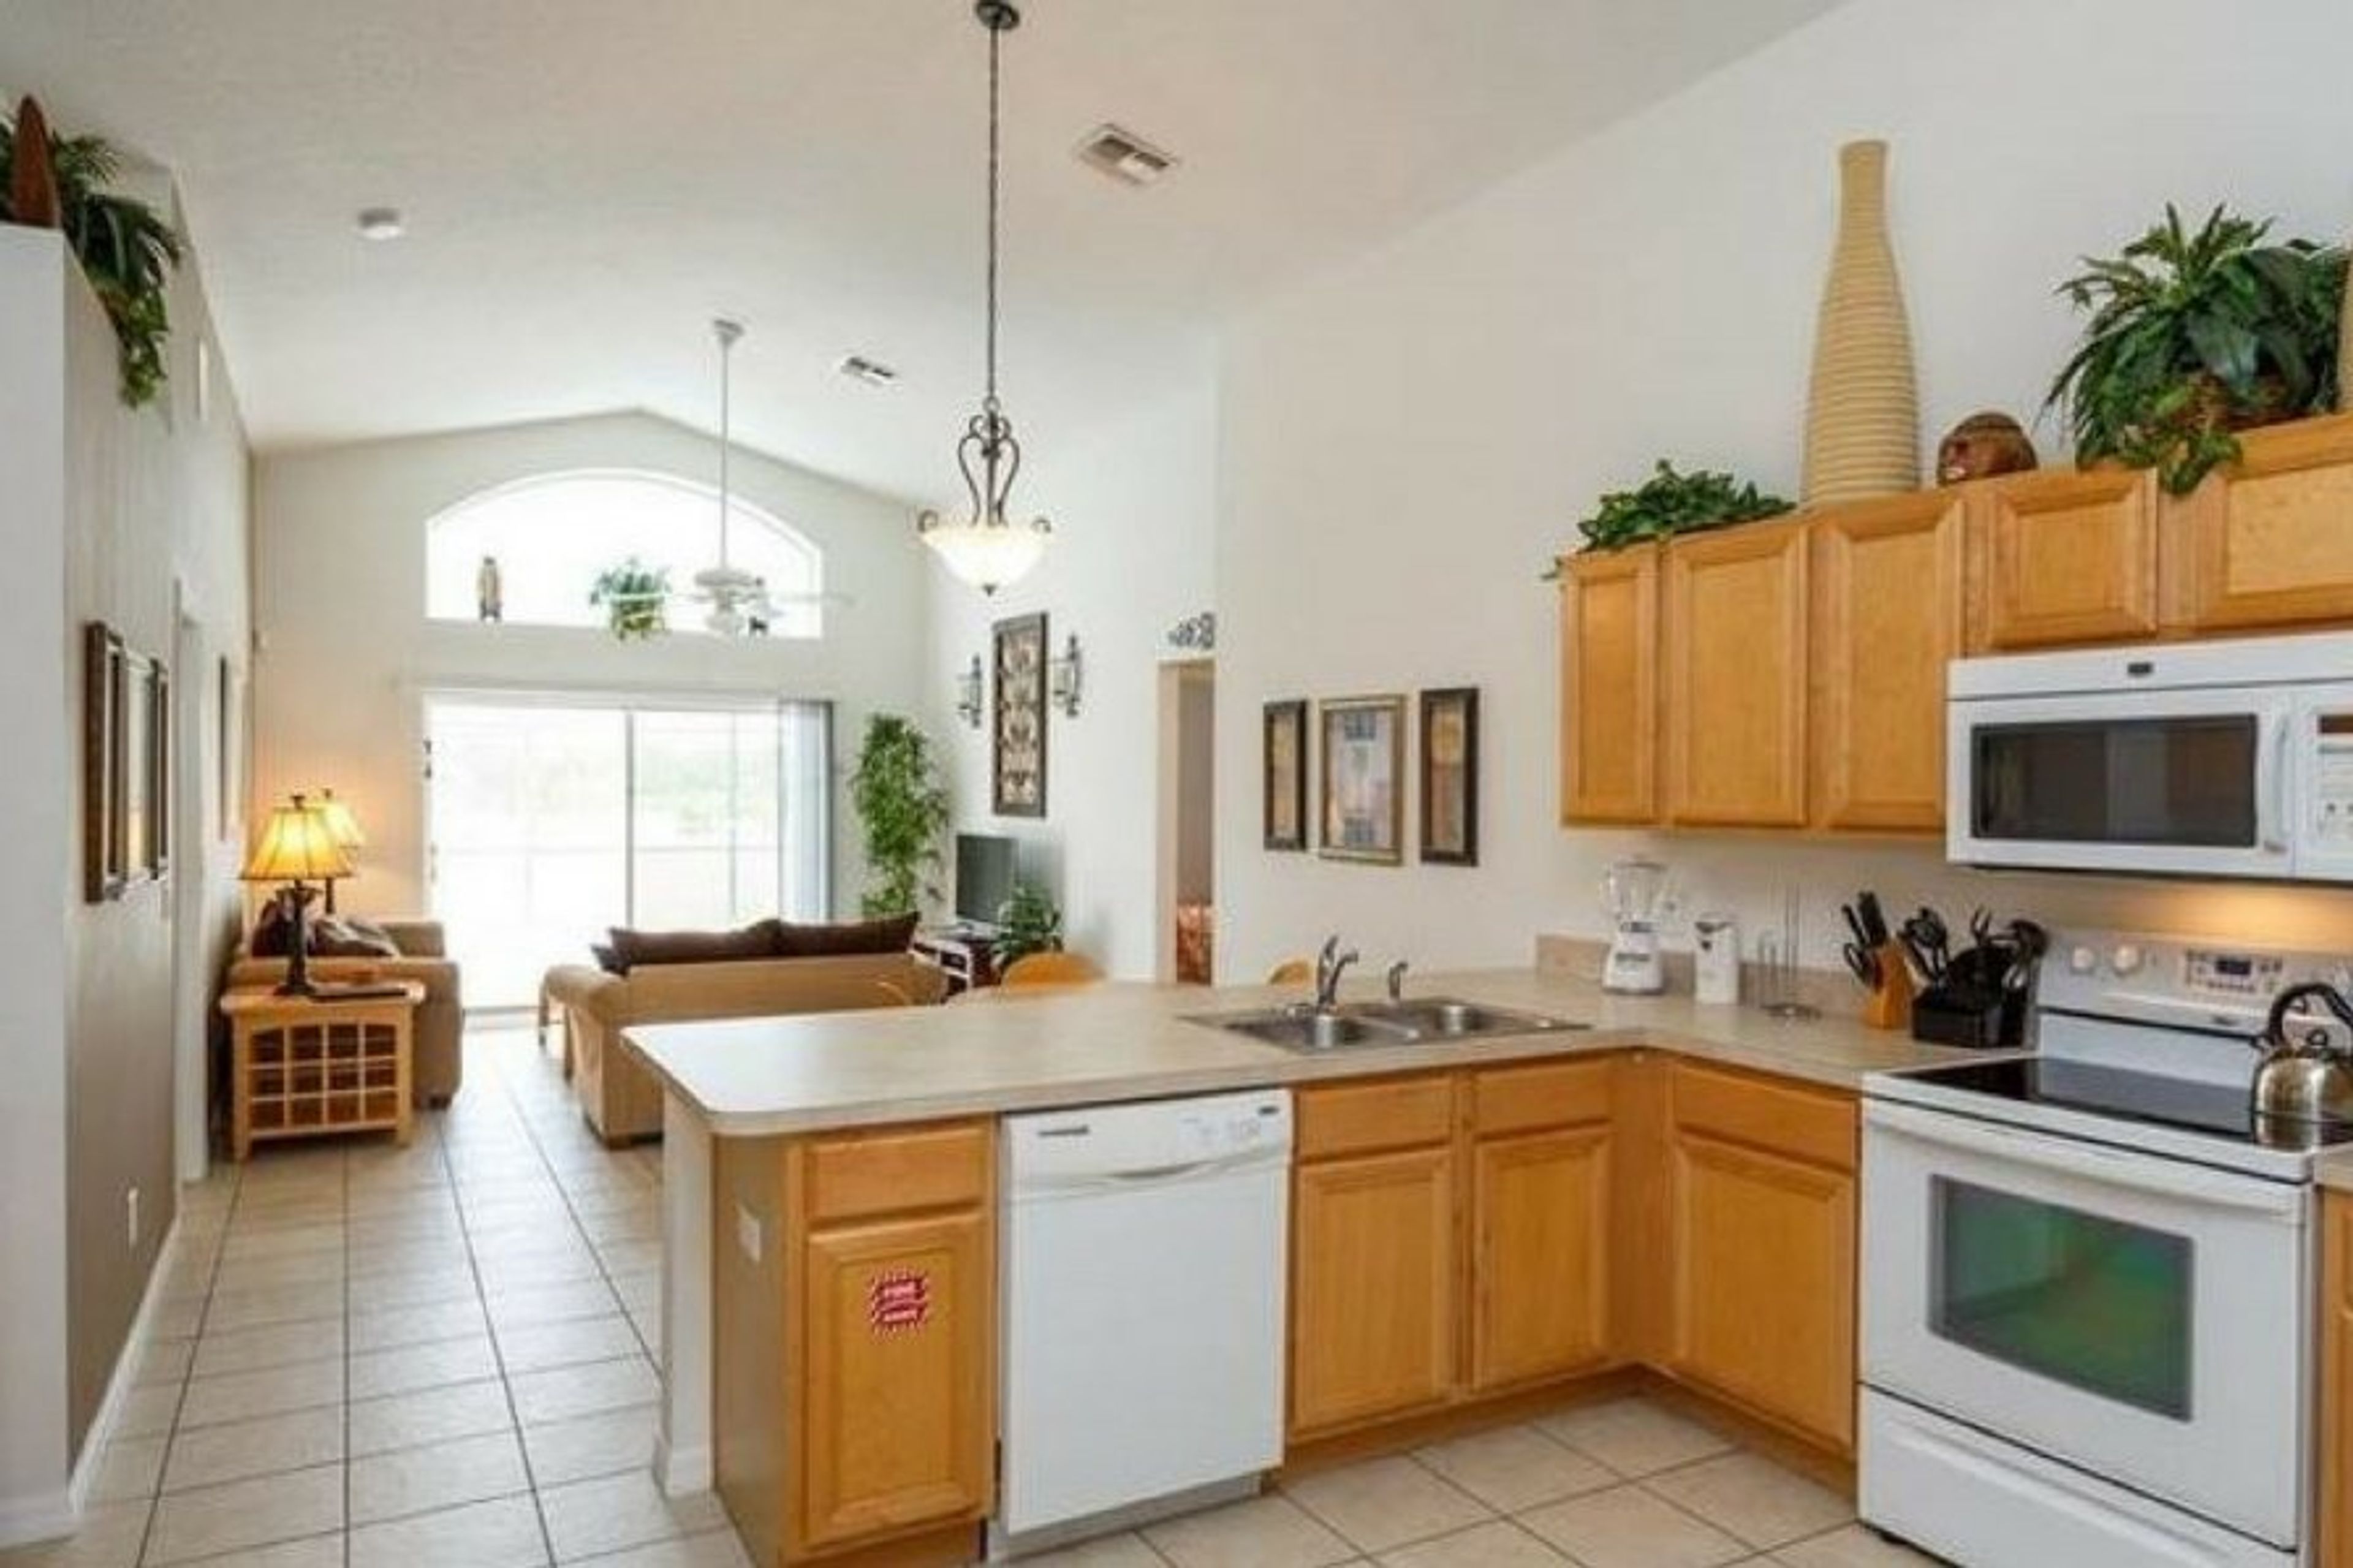 Well equipped kitchen overlooking the pool and patio area.